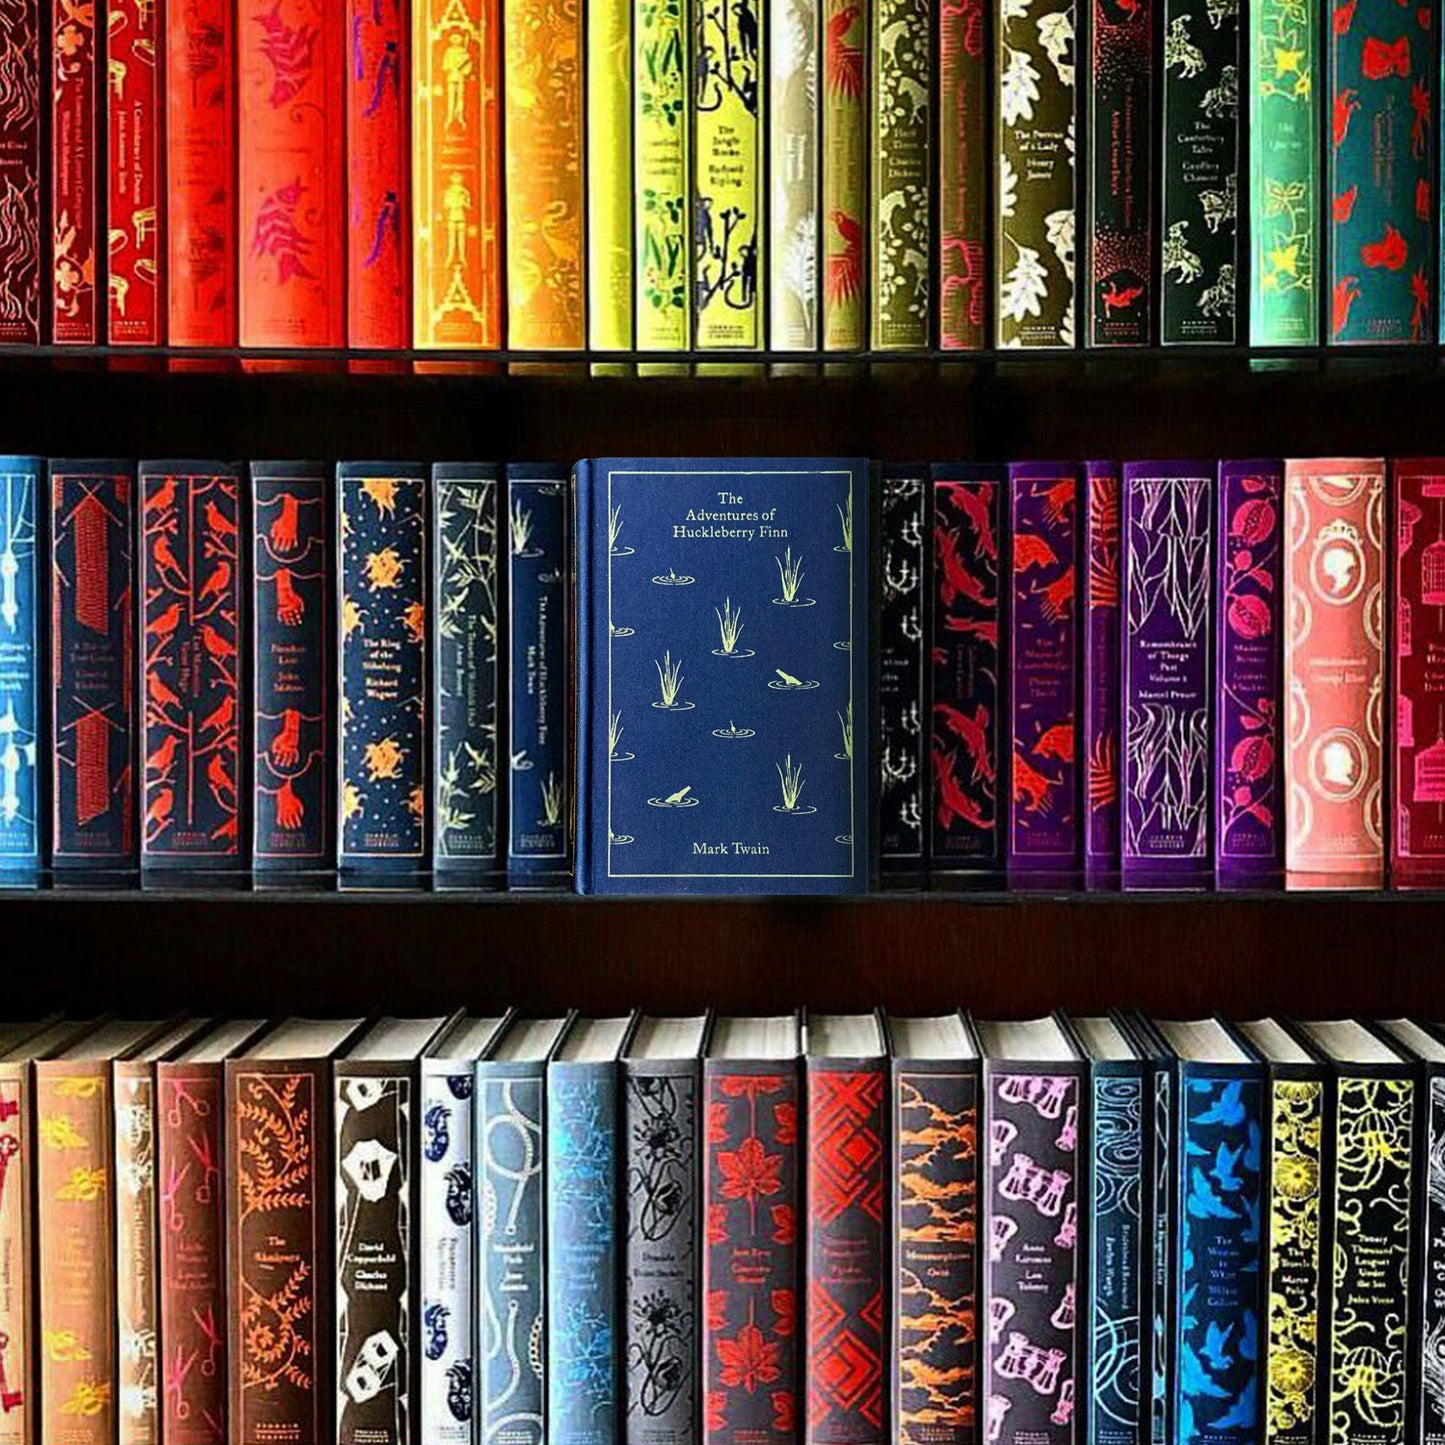 A collection of colorful books lined up on three bookshelves. In the center is a blue book with yellow text saying "The adventures of huckleberry finn, Mark Twain."